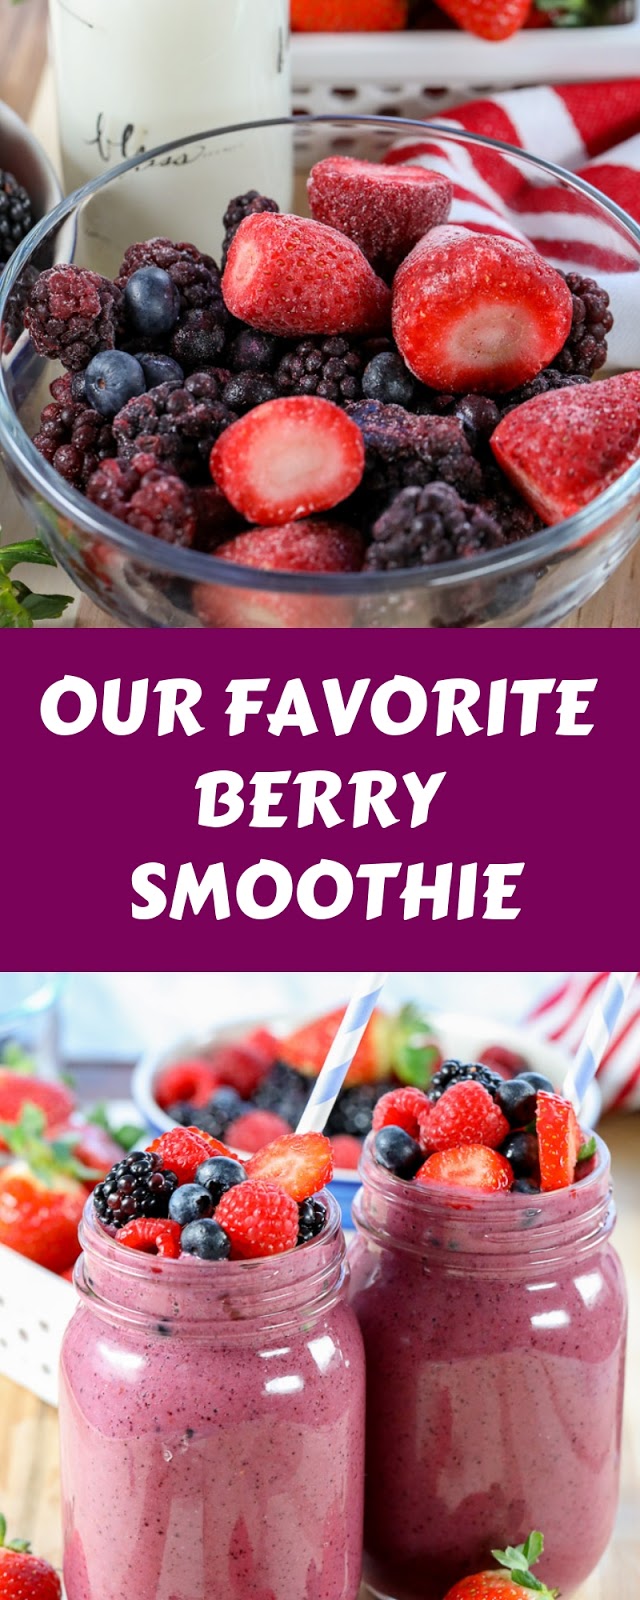 OUR FAVORITE BERRY SMOOTHIE